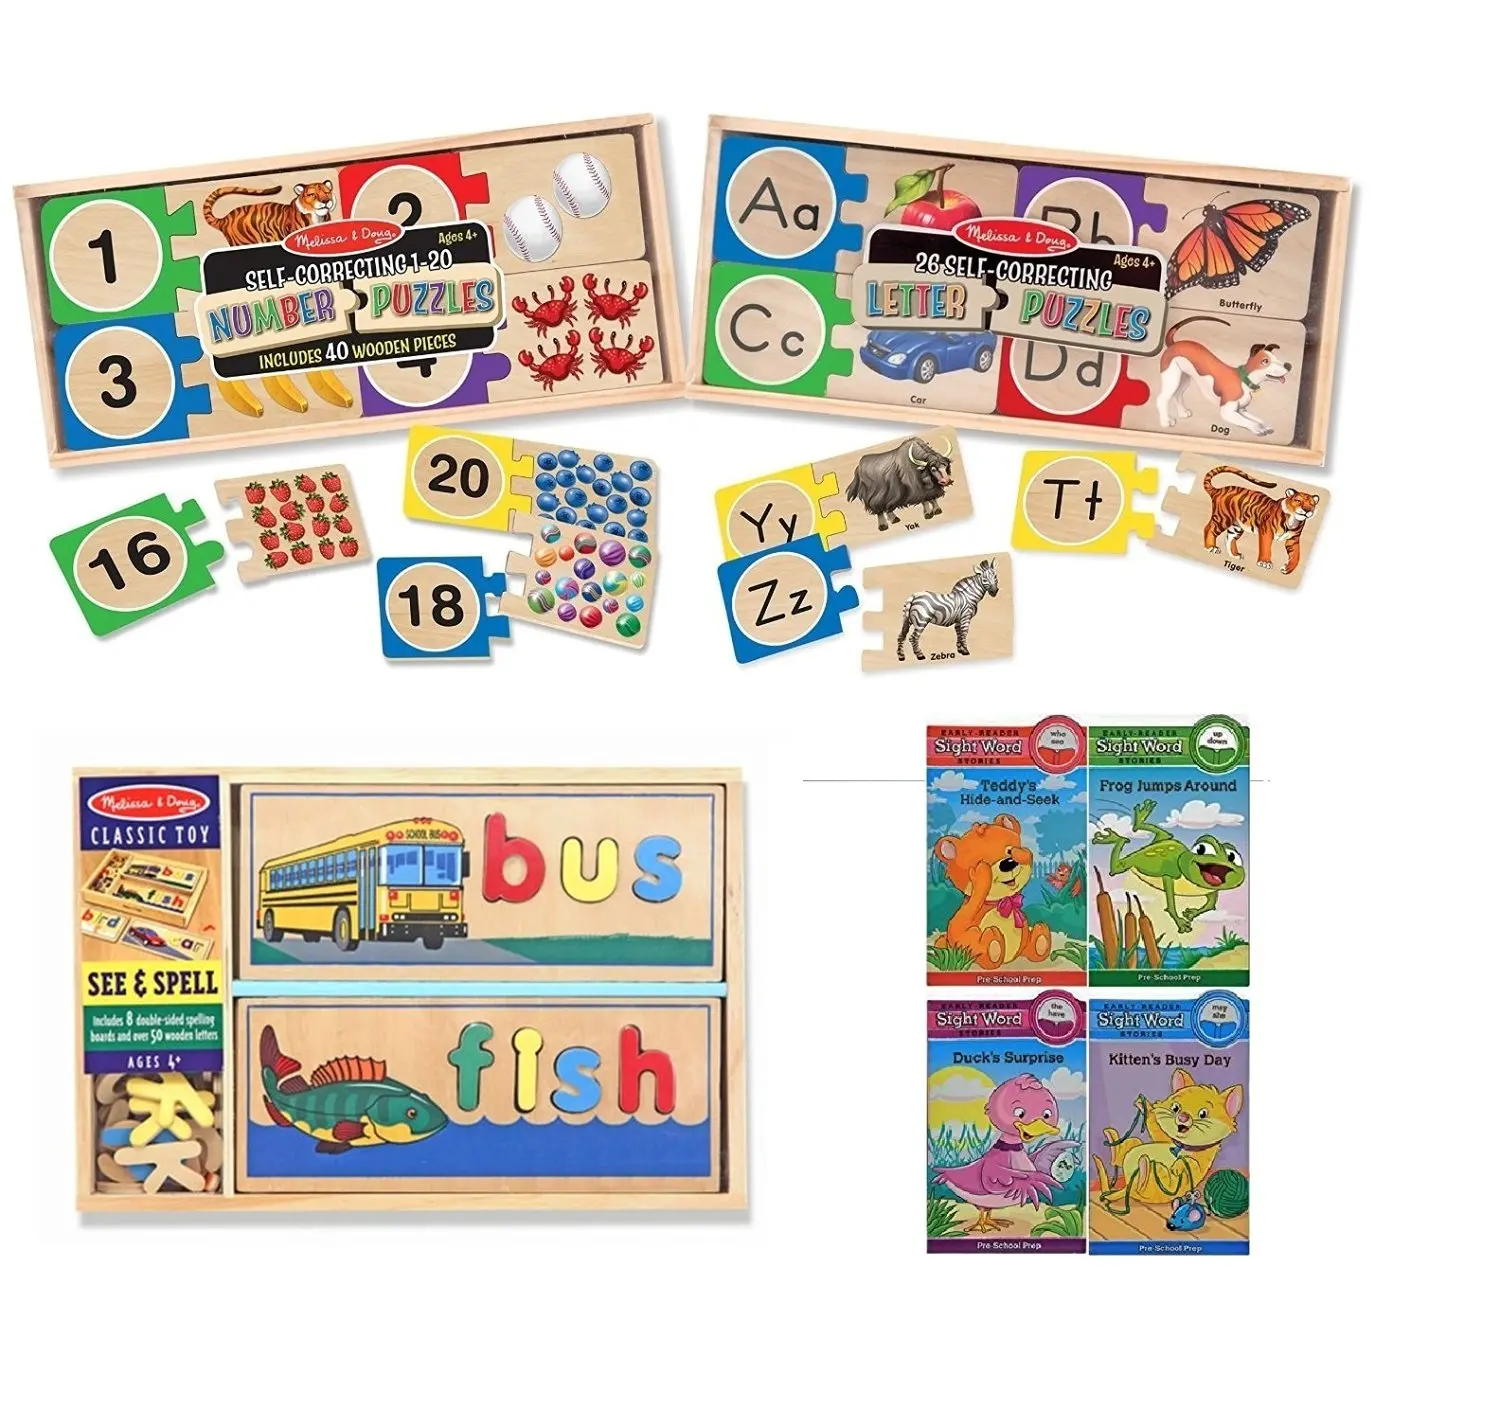 melissa and doug letter puzzle